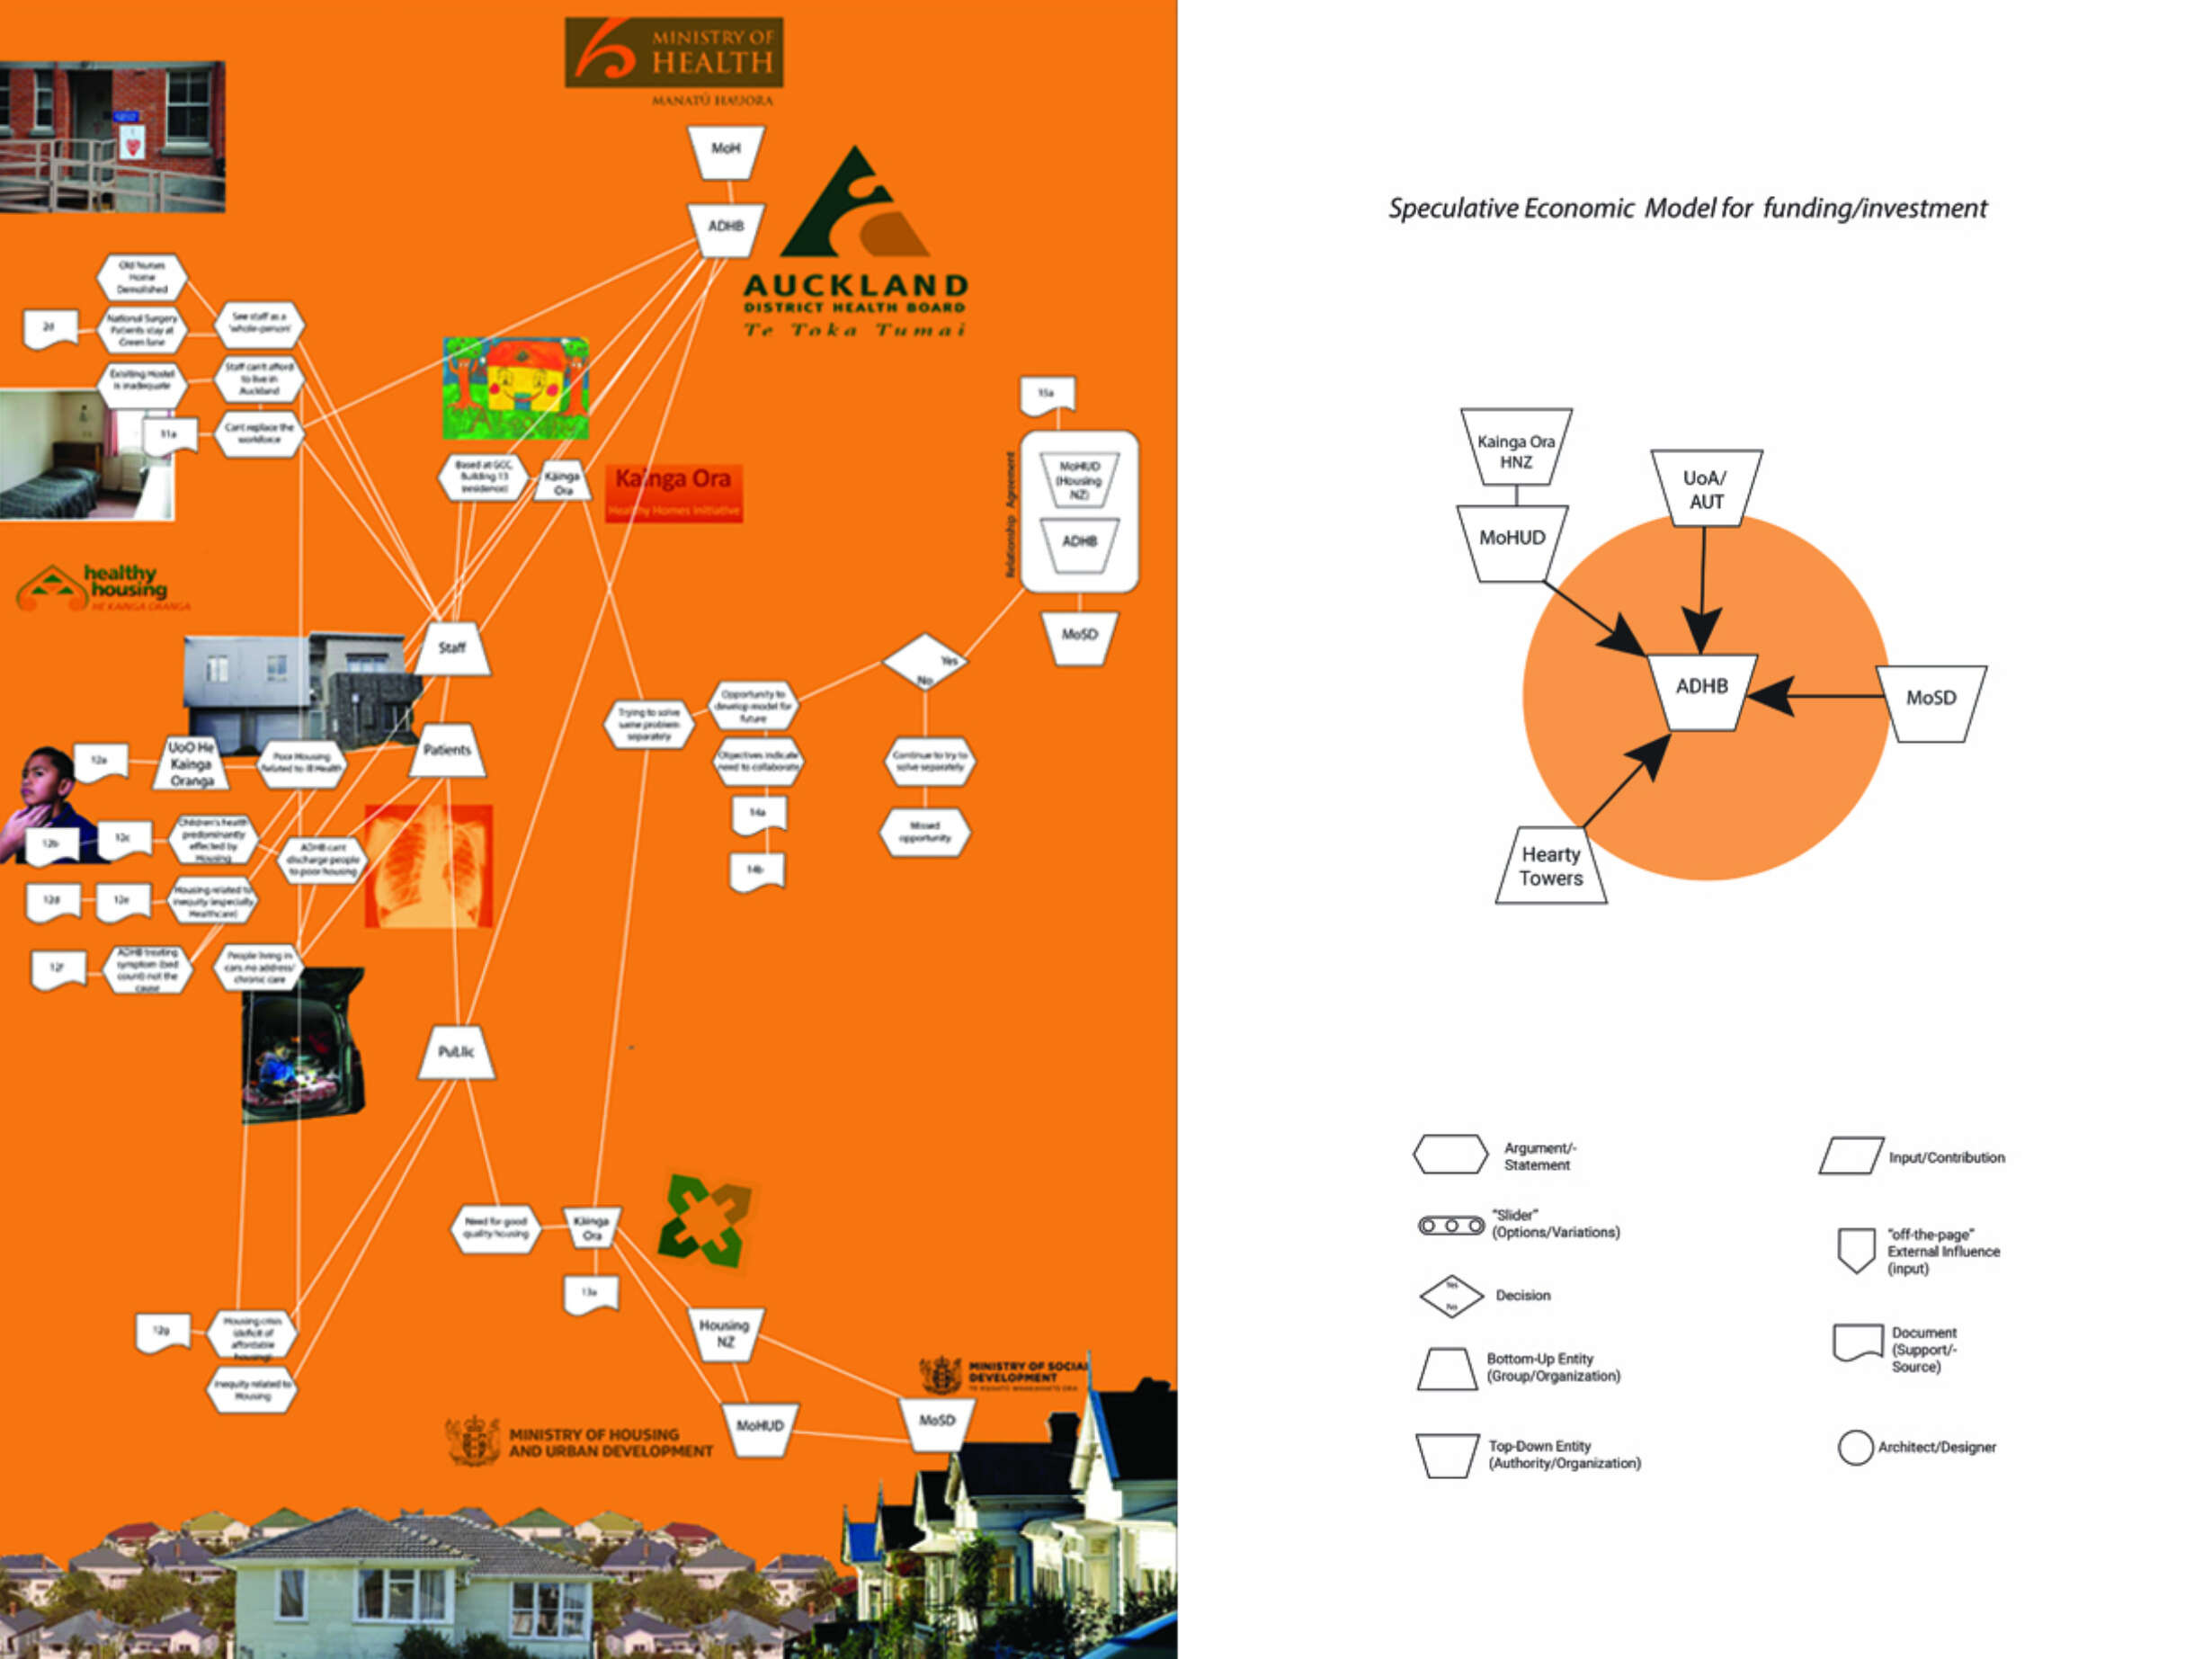 The ecology mapping and diagrams to visualize the complexity of the site, its interdependence with the city and the hidden potential of these connections.